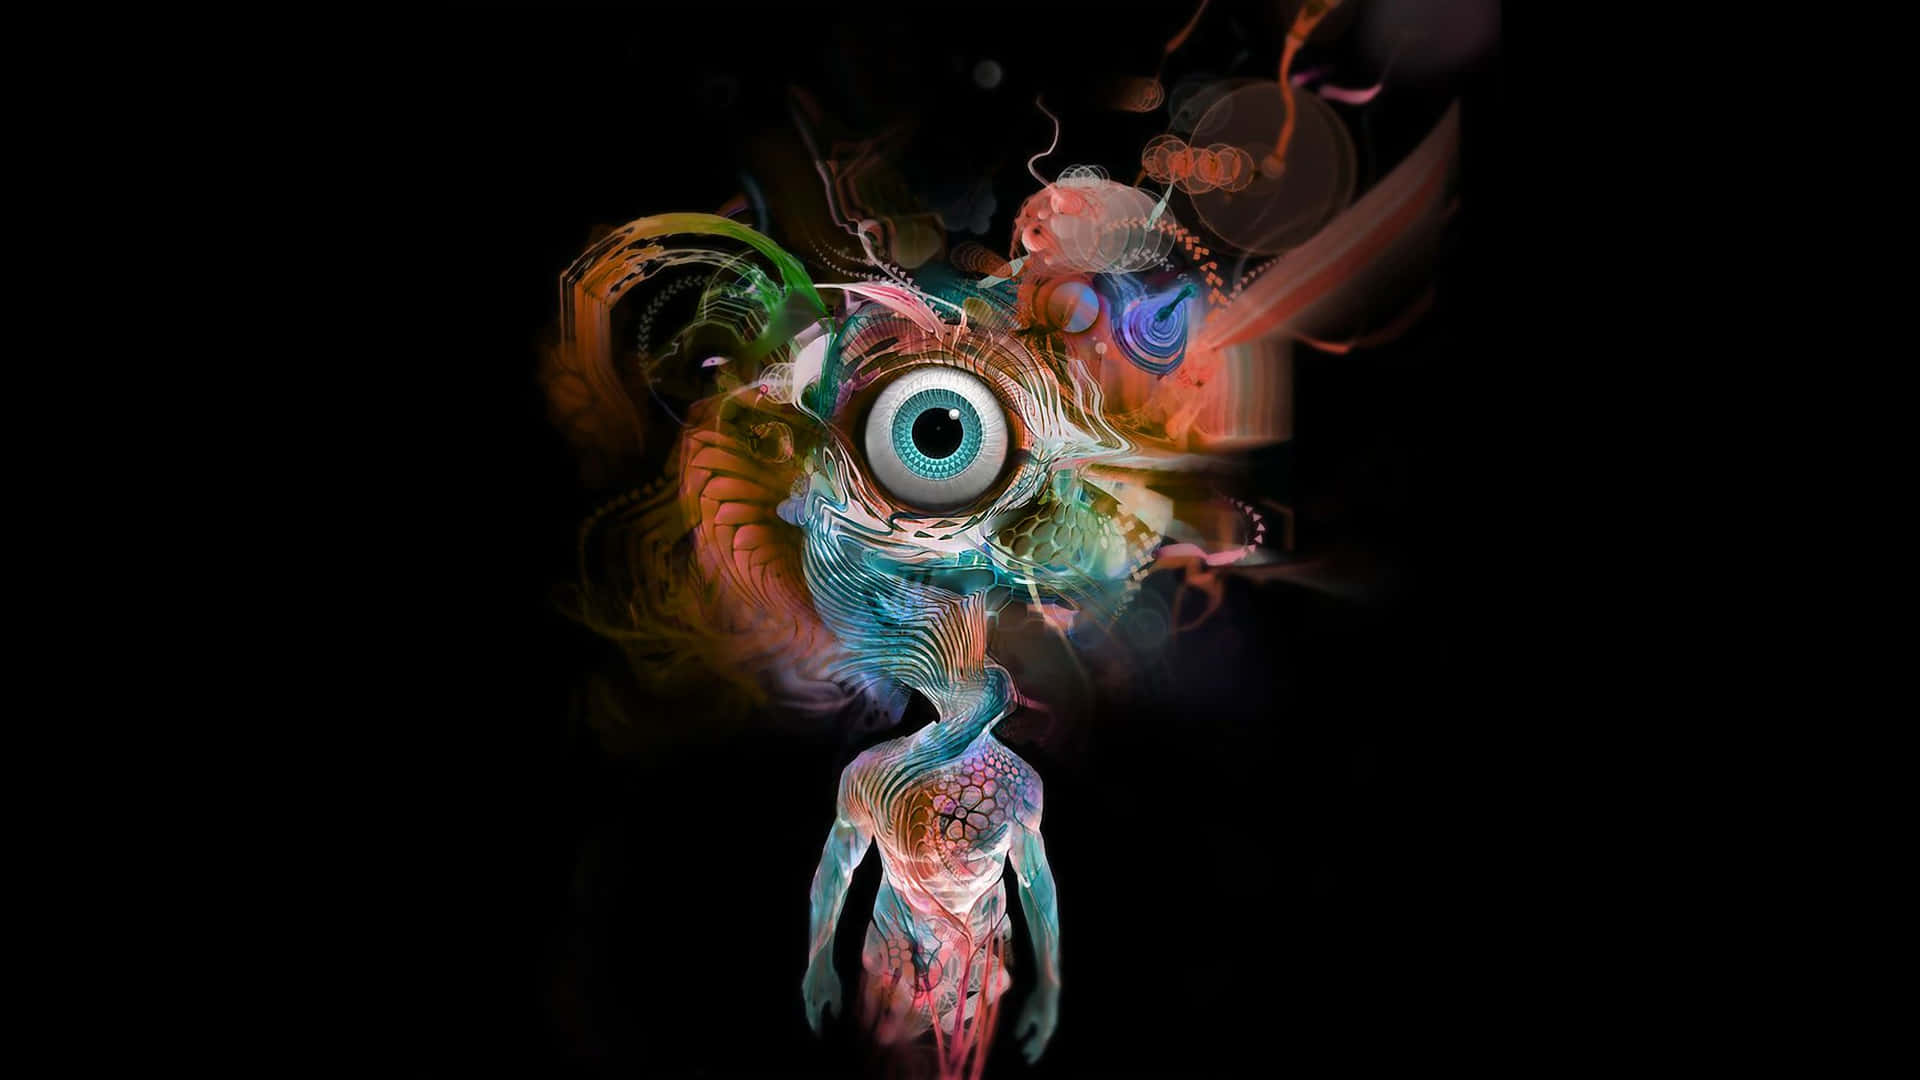 A Colorful Image Of A Person With A Colorful Eye Wallpaper